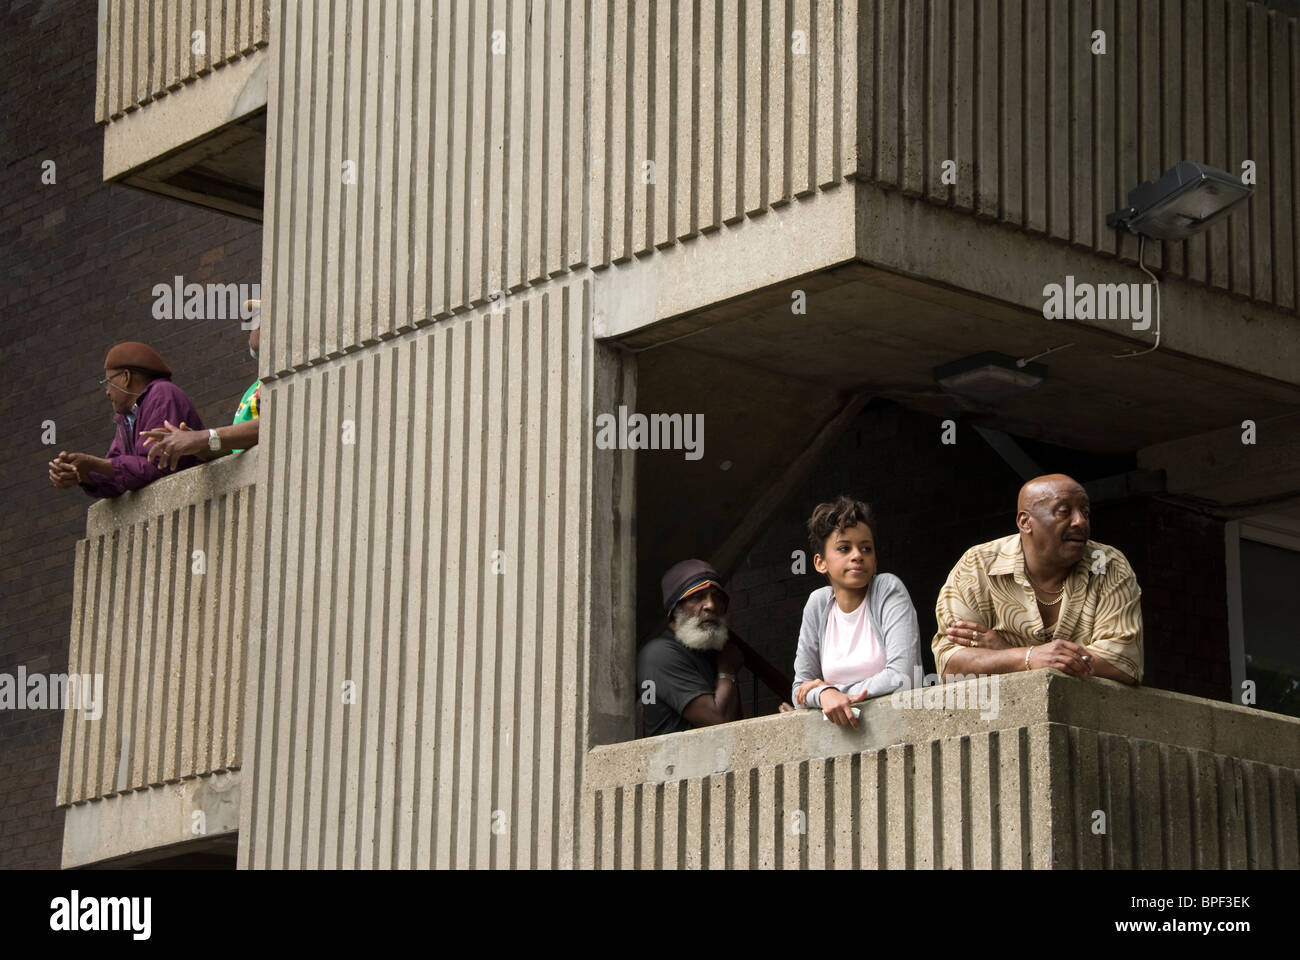 Residents in West London housing estate on their balconies watching Notting hill carnival going by. Stock Photo